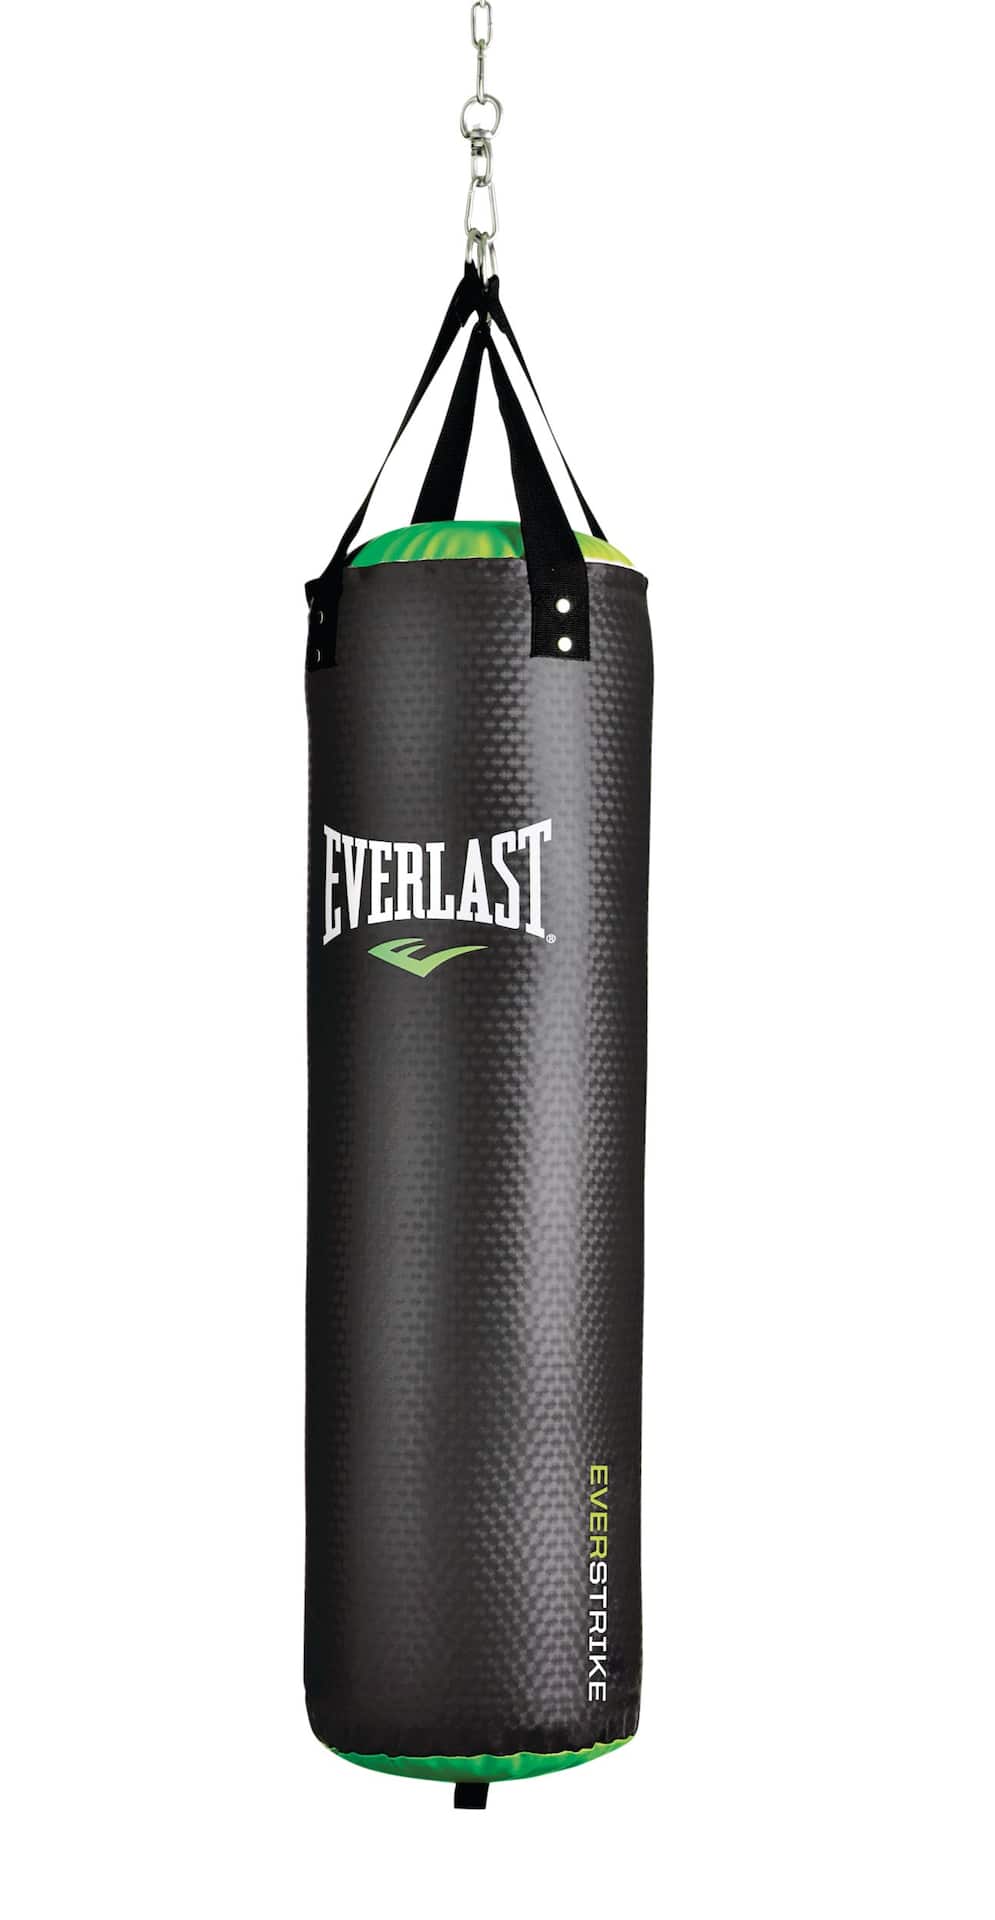 Buy USI UNIVERSAL THE UNBEATABLE Men's Filled Boxing Genuine Leather Punching  Bag 3.5 ft with Chain Set Online at Low Prices in India - Amazon.in